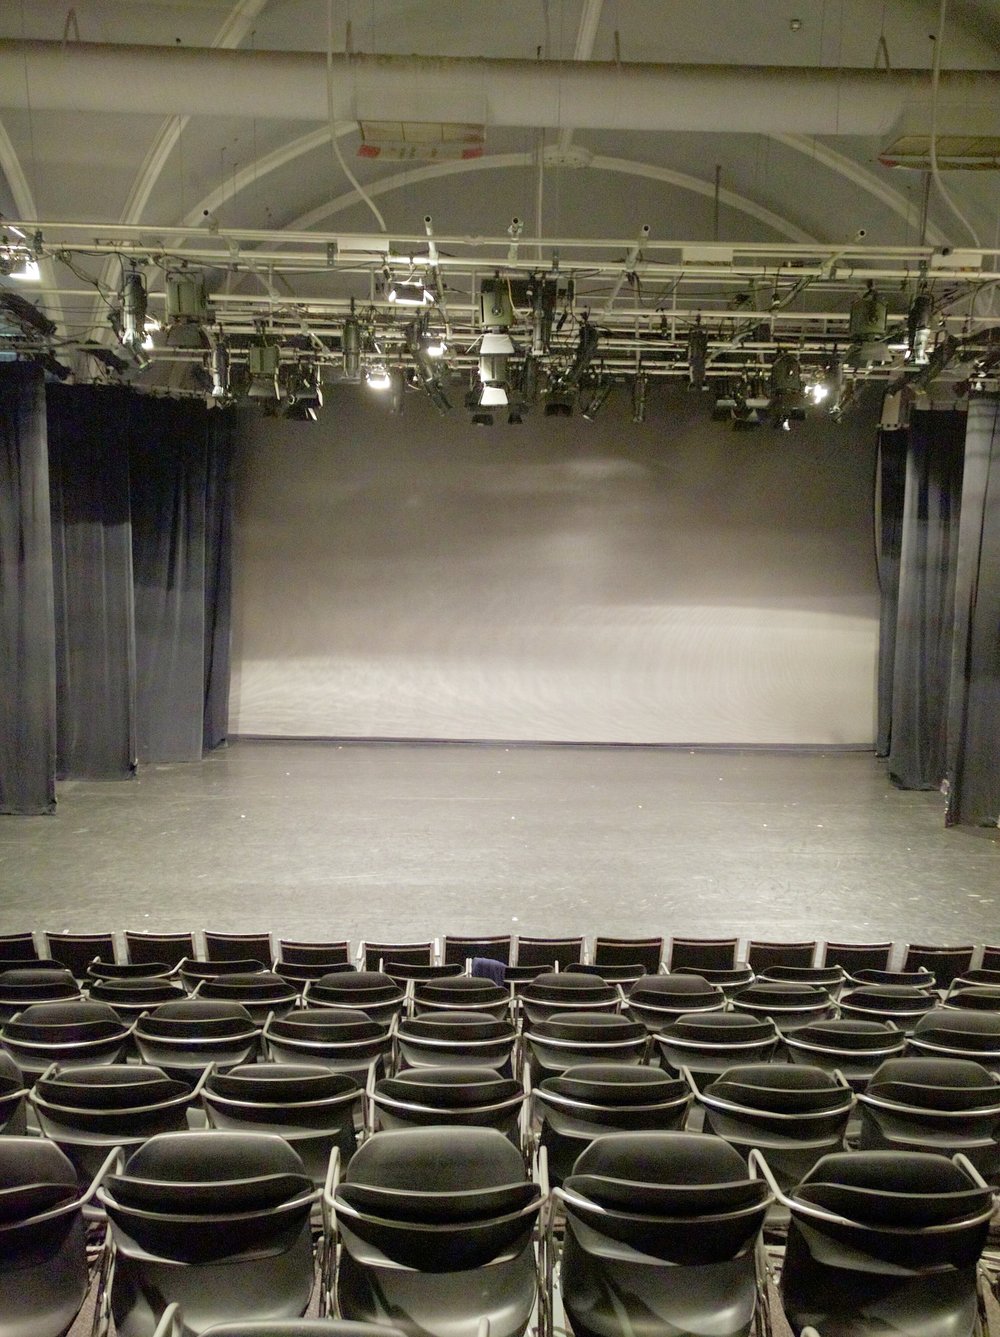 Theatre with full masking